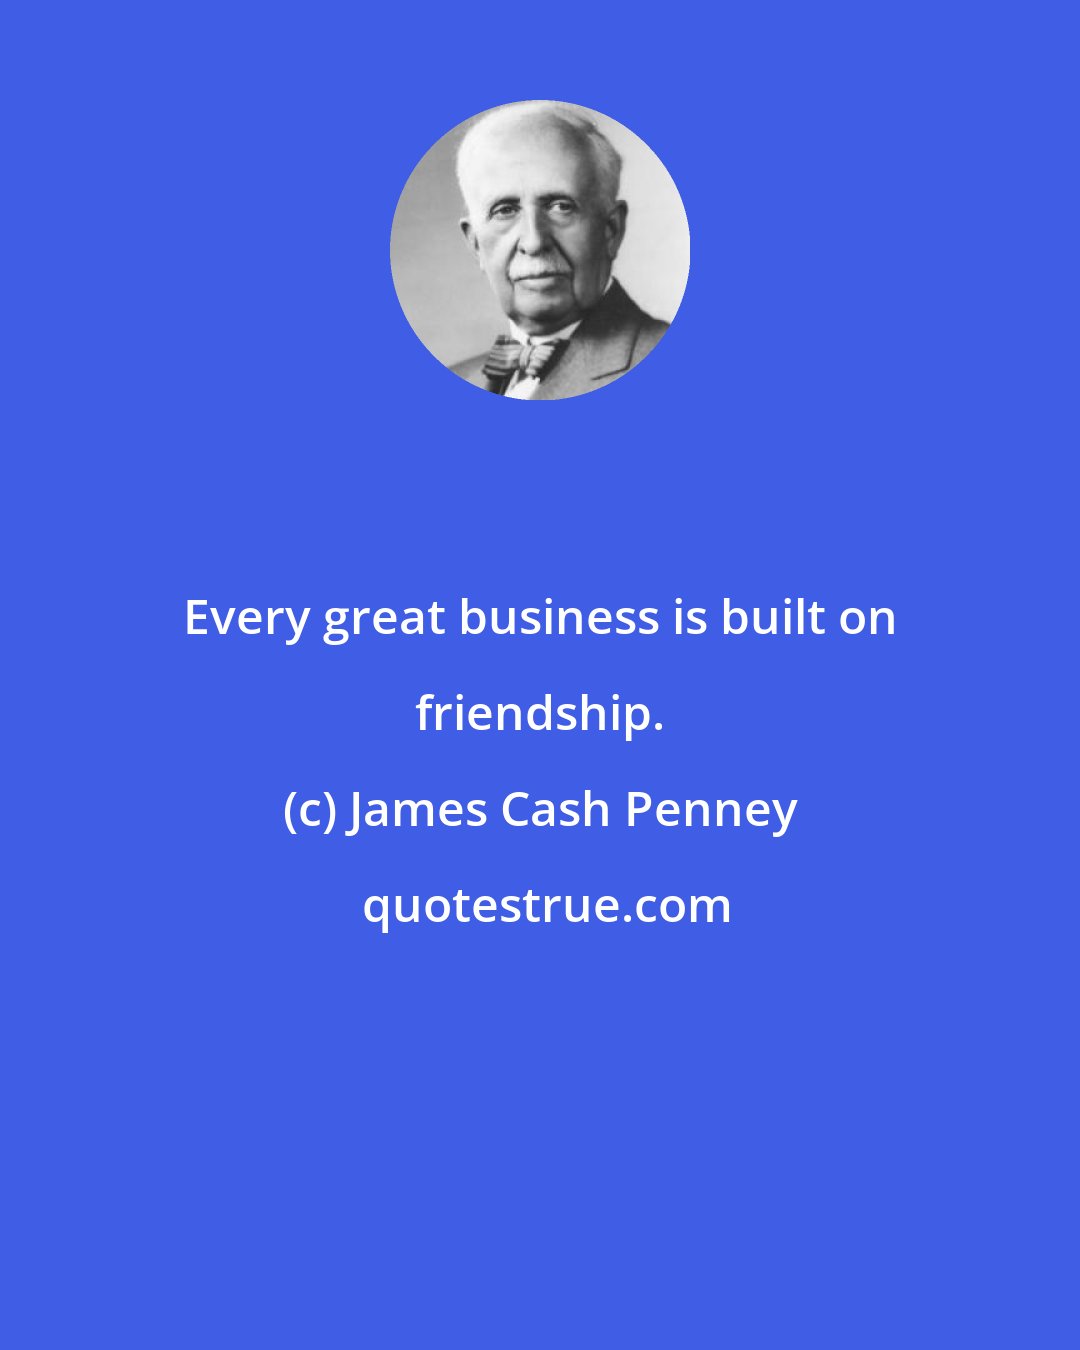 James Cash Penney: Every great business is built on friendship.